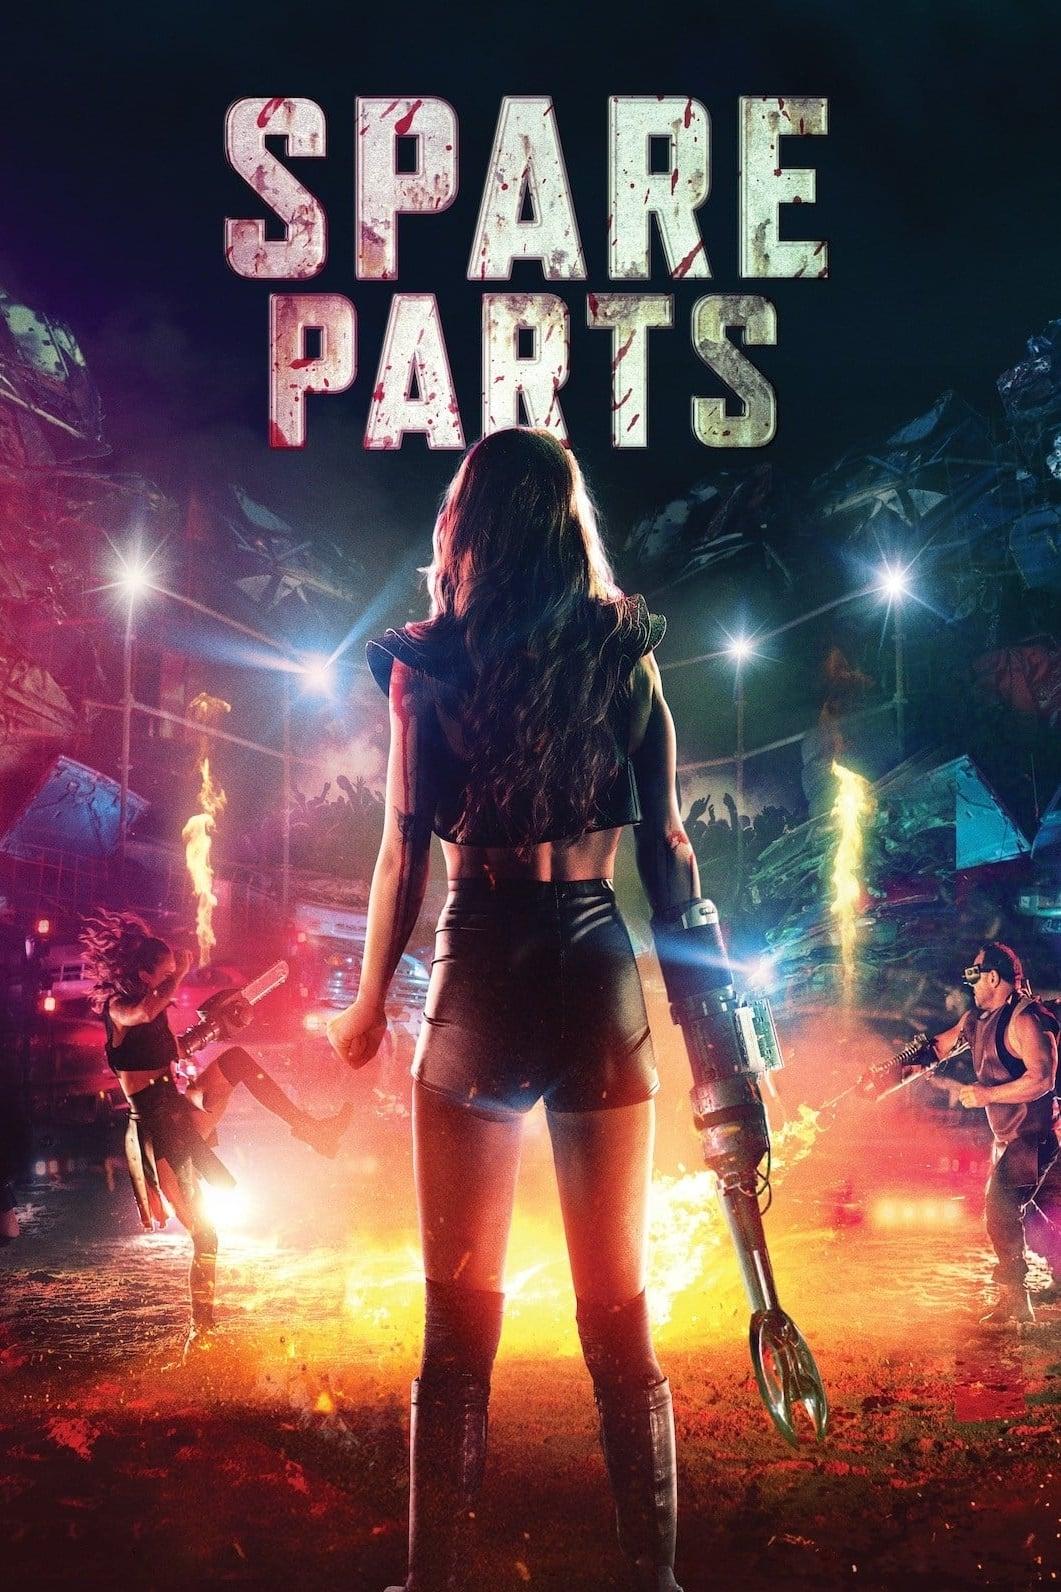 Spare Parts poster